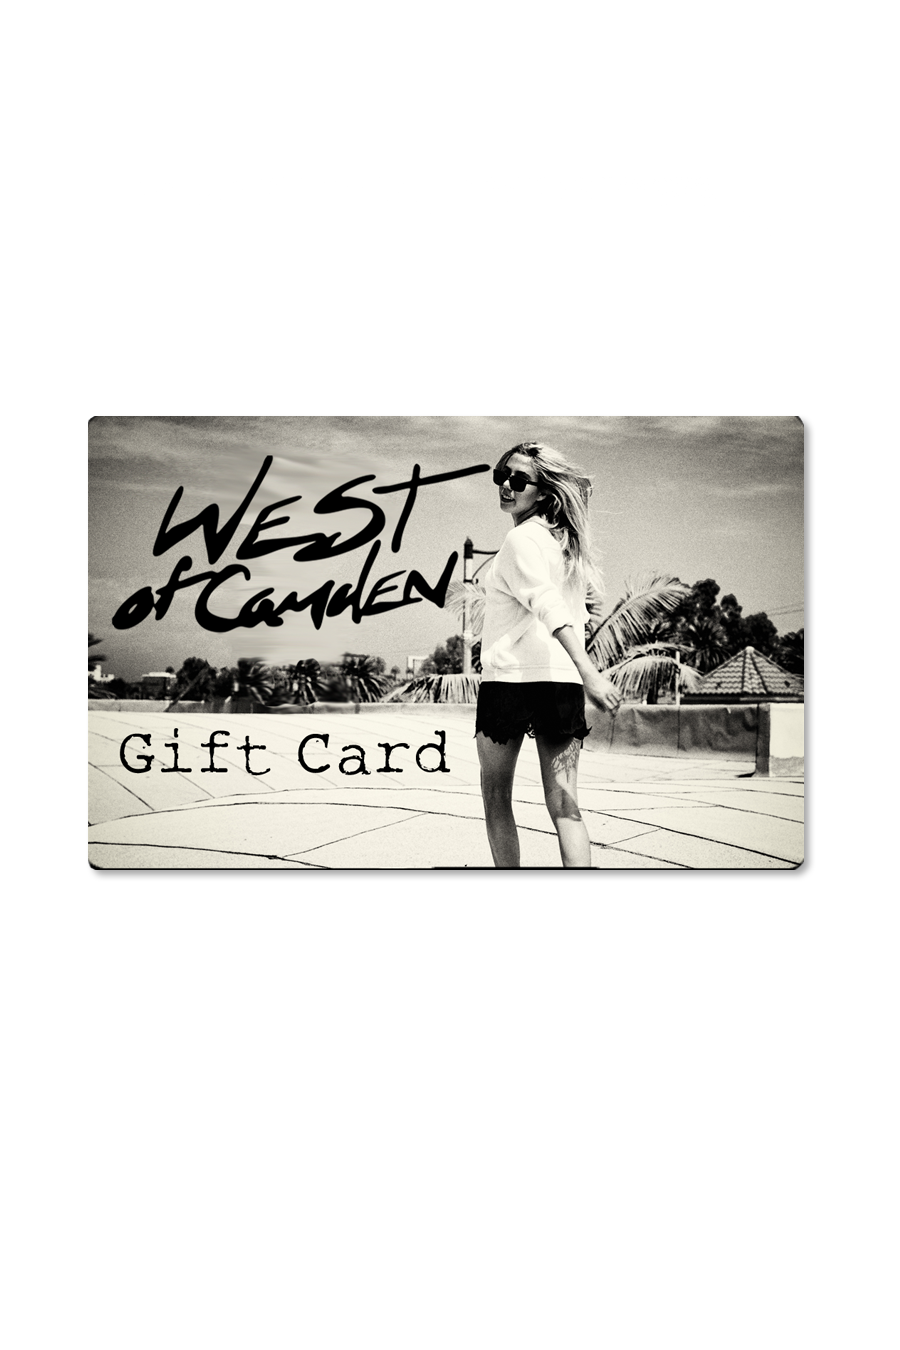 Gift Card - West of Camden - Main Image Number 1 of 5